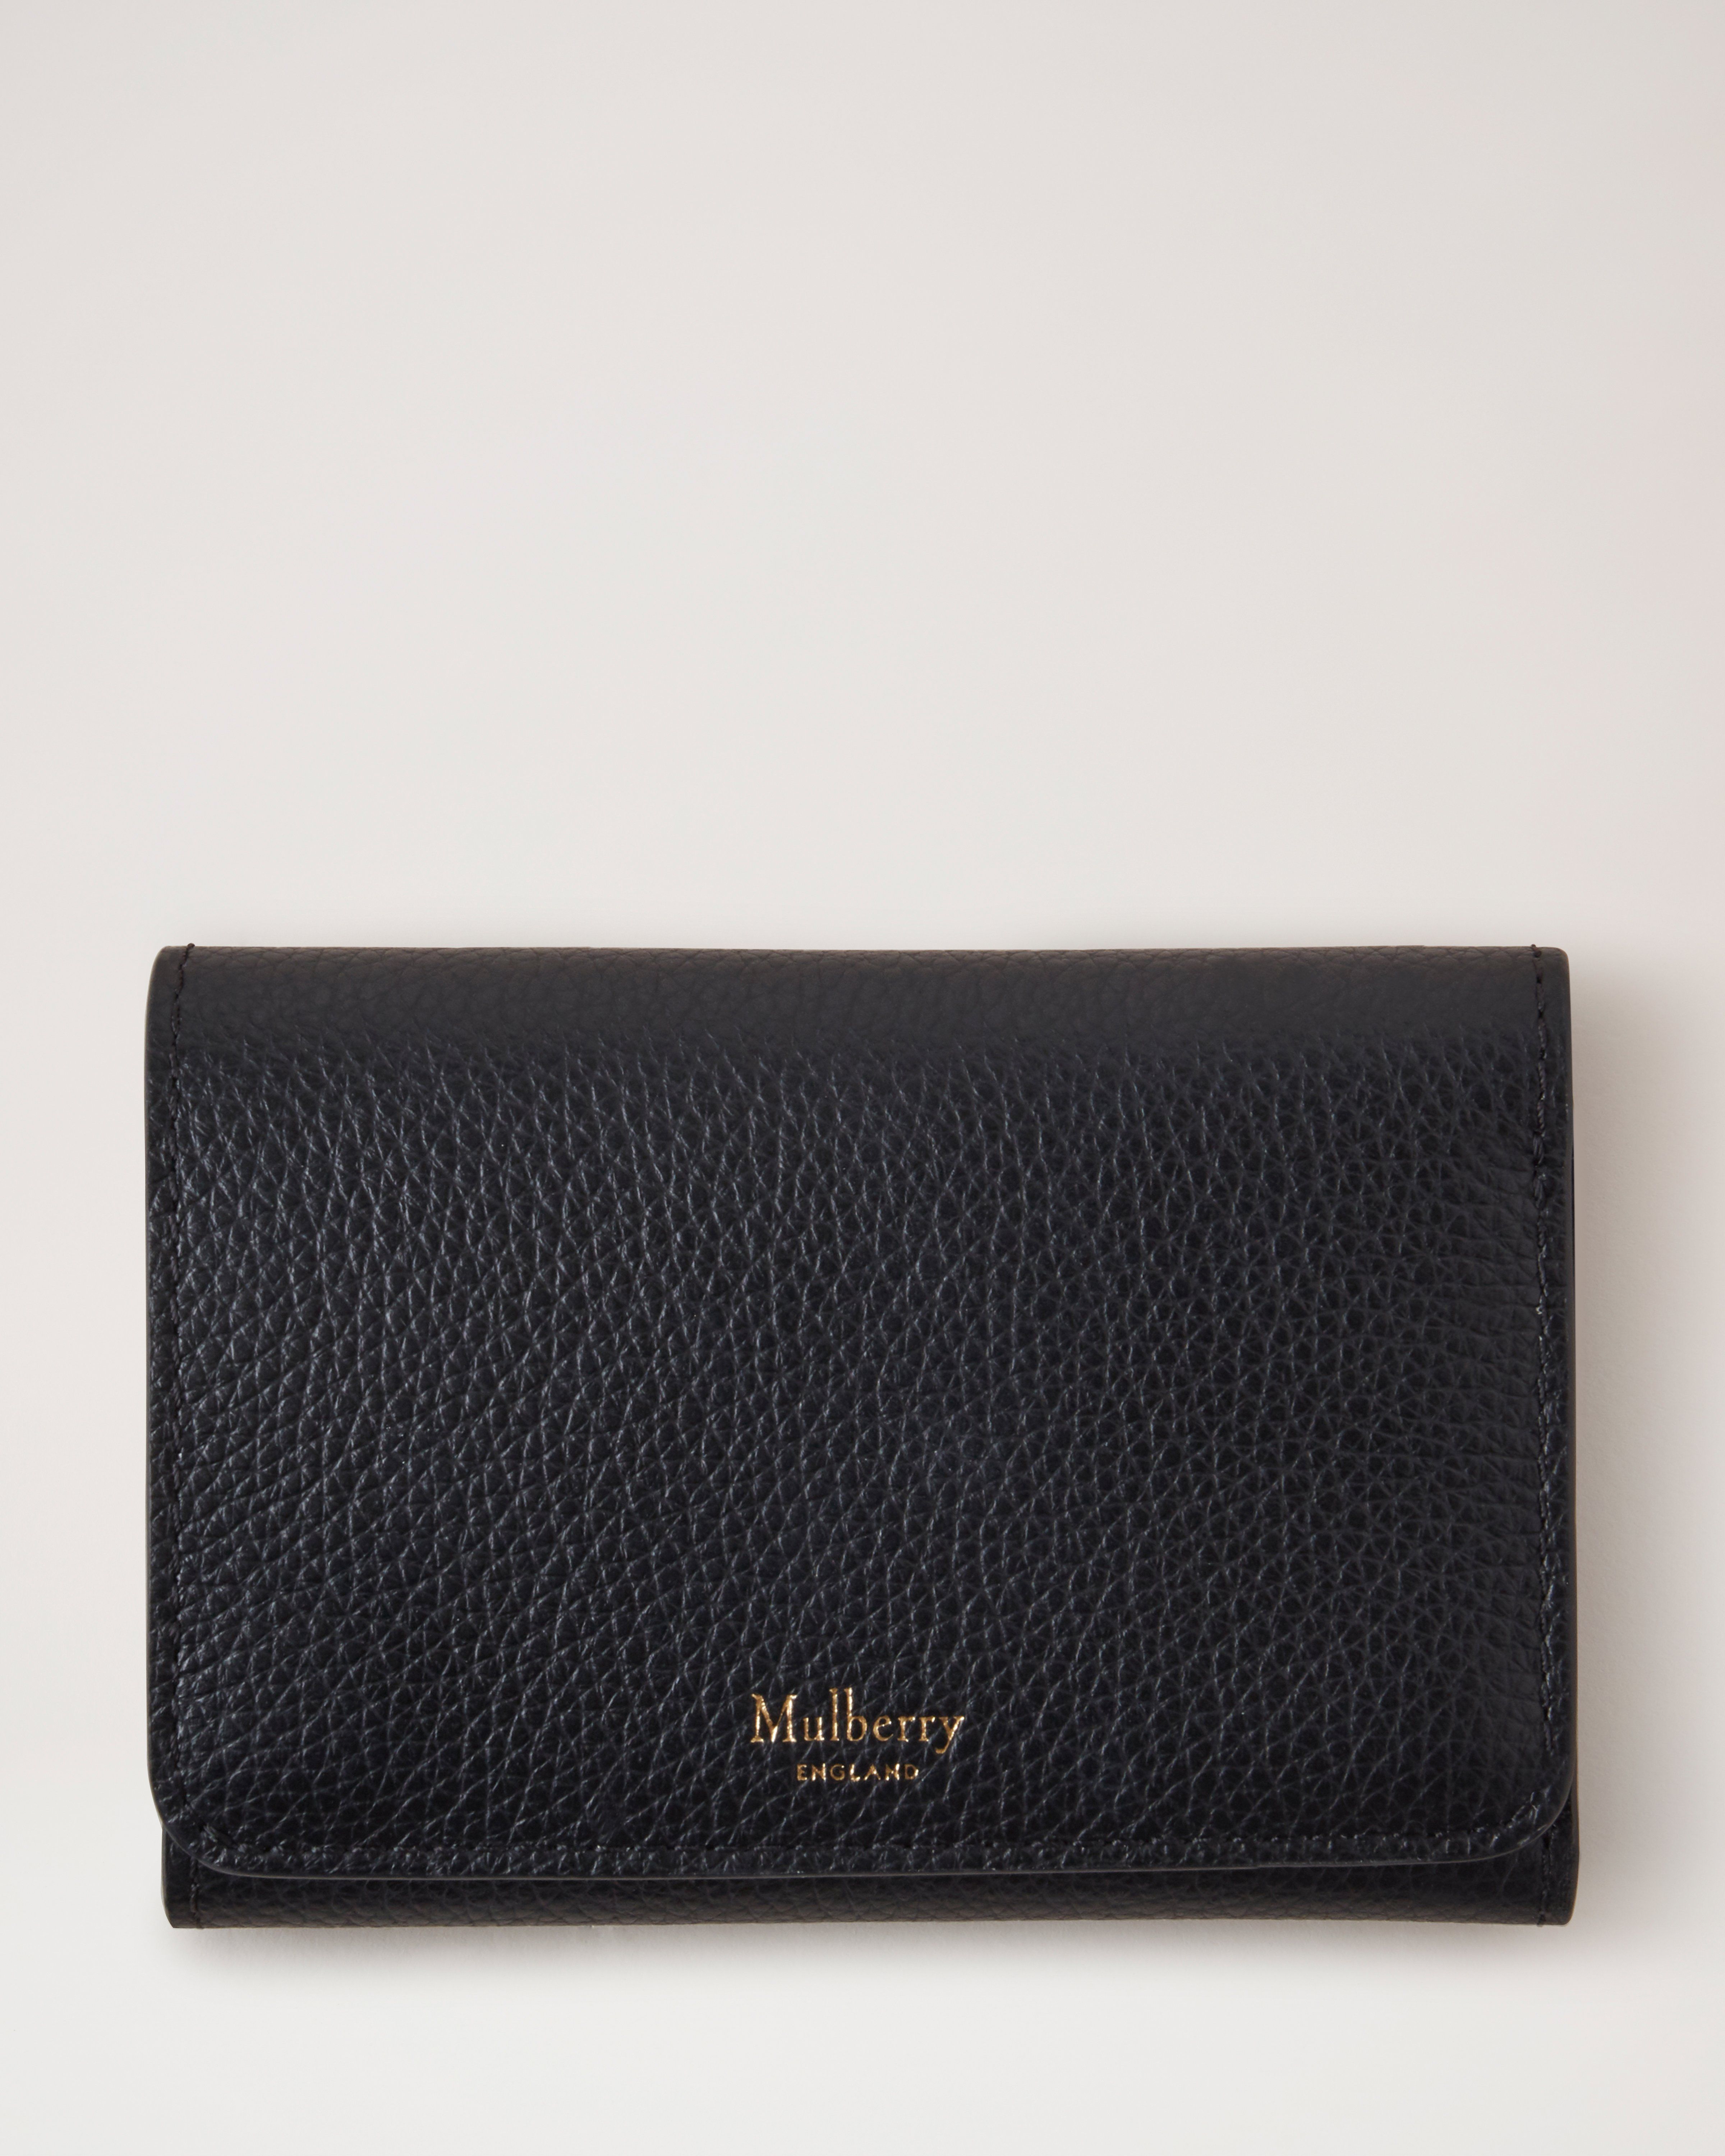 Mulberry Small Classic Grain Leather Continental Wallet, Black at